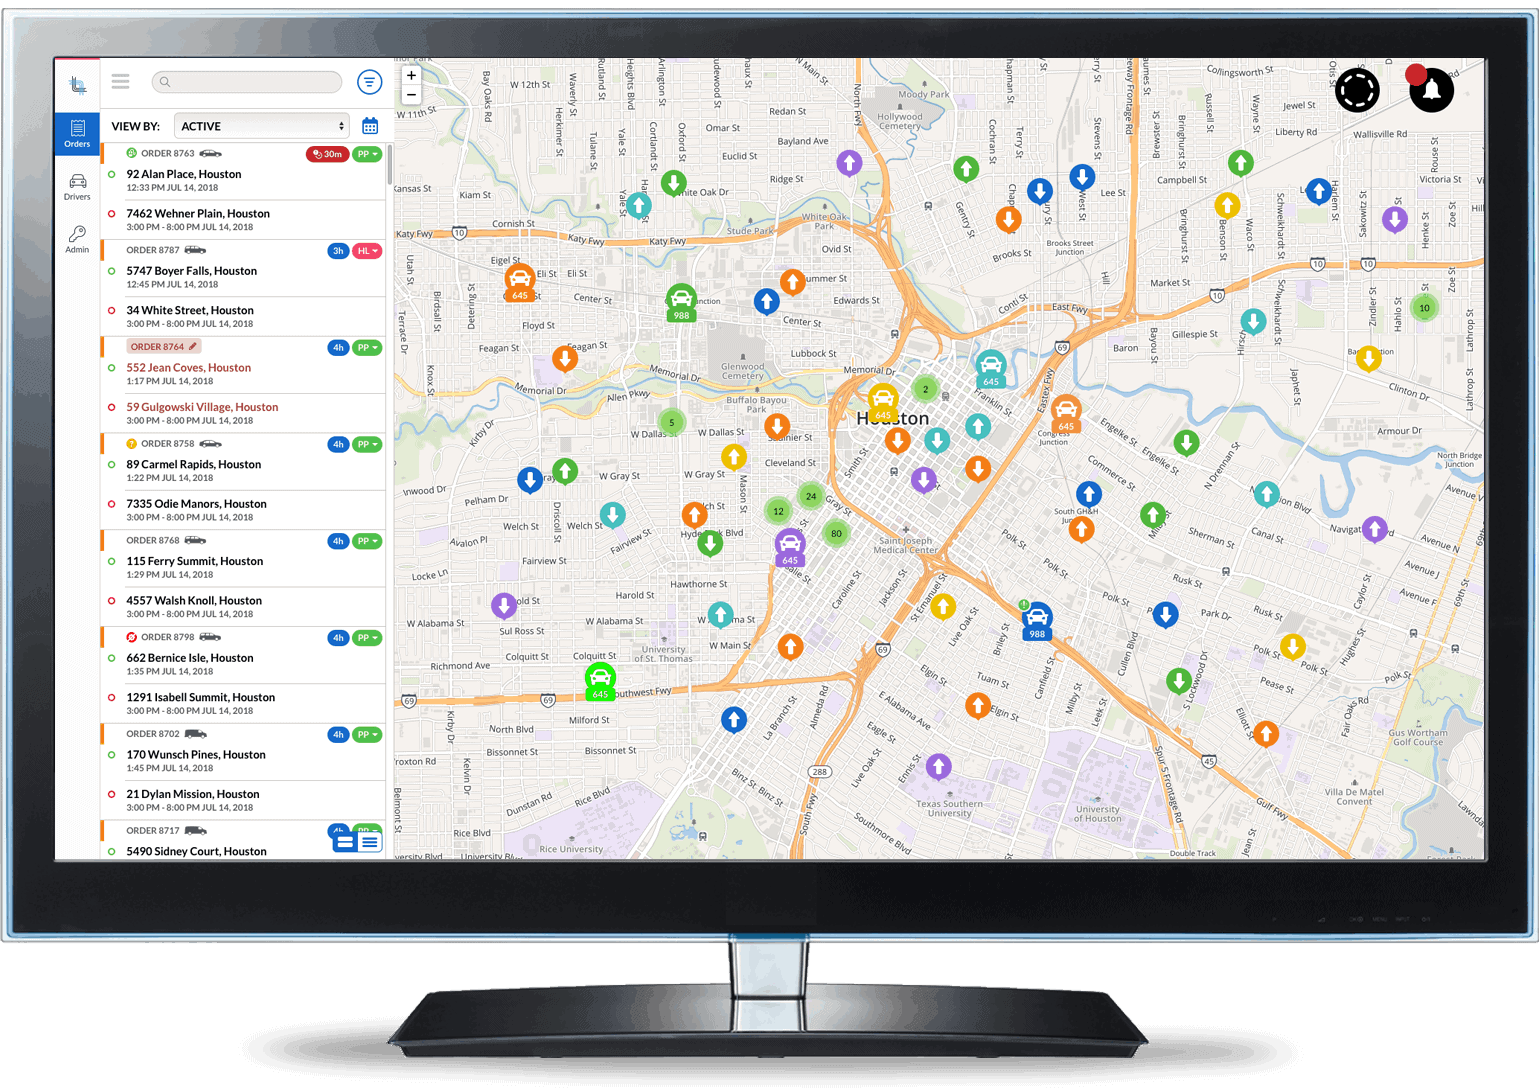 A computer monitor displaying a detailed map with various location markers and a list of locations on the left sidebar.